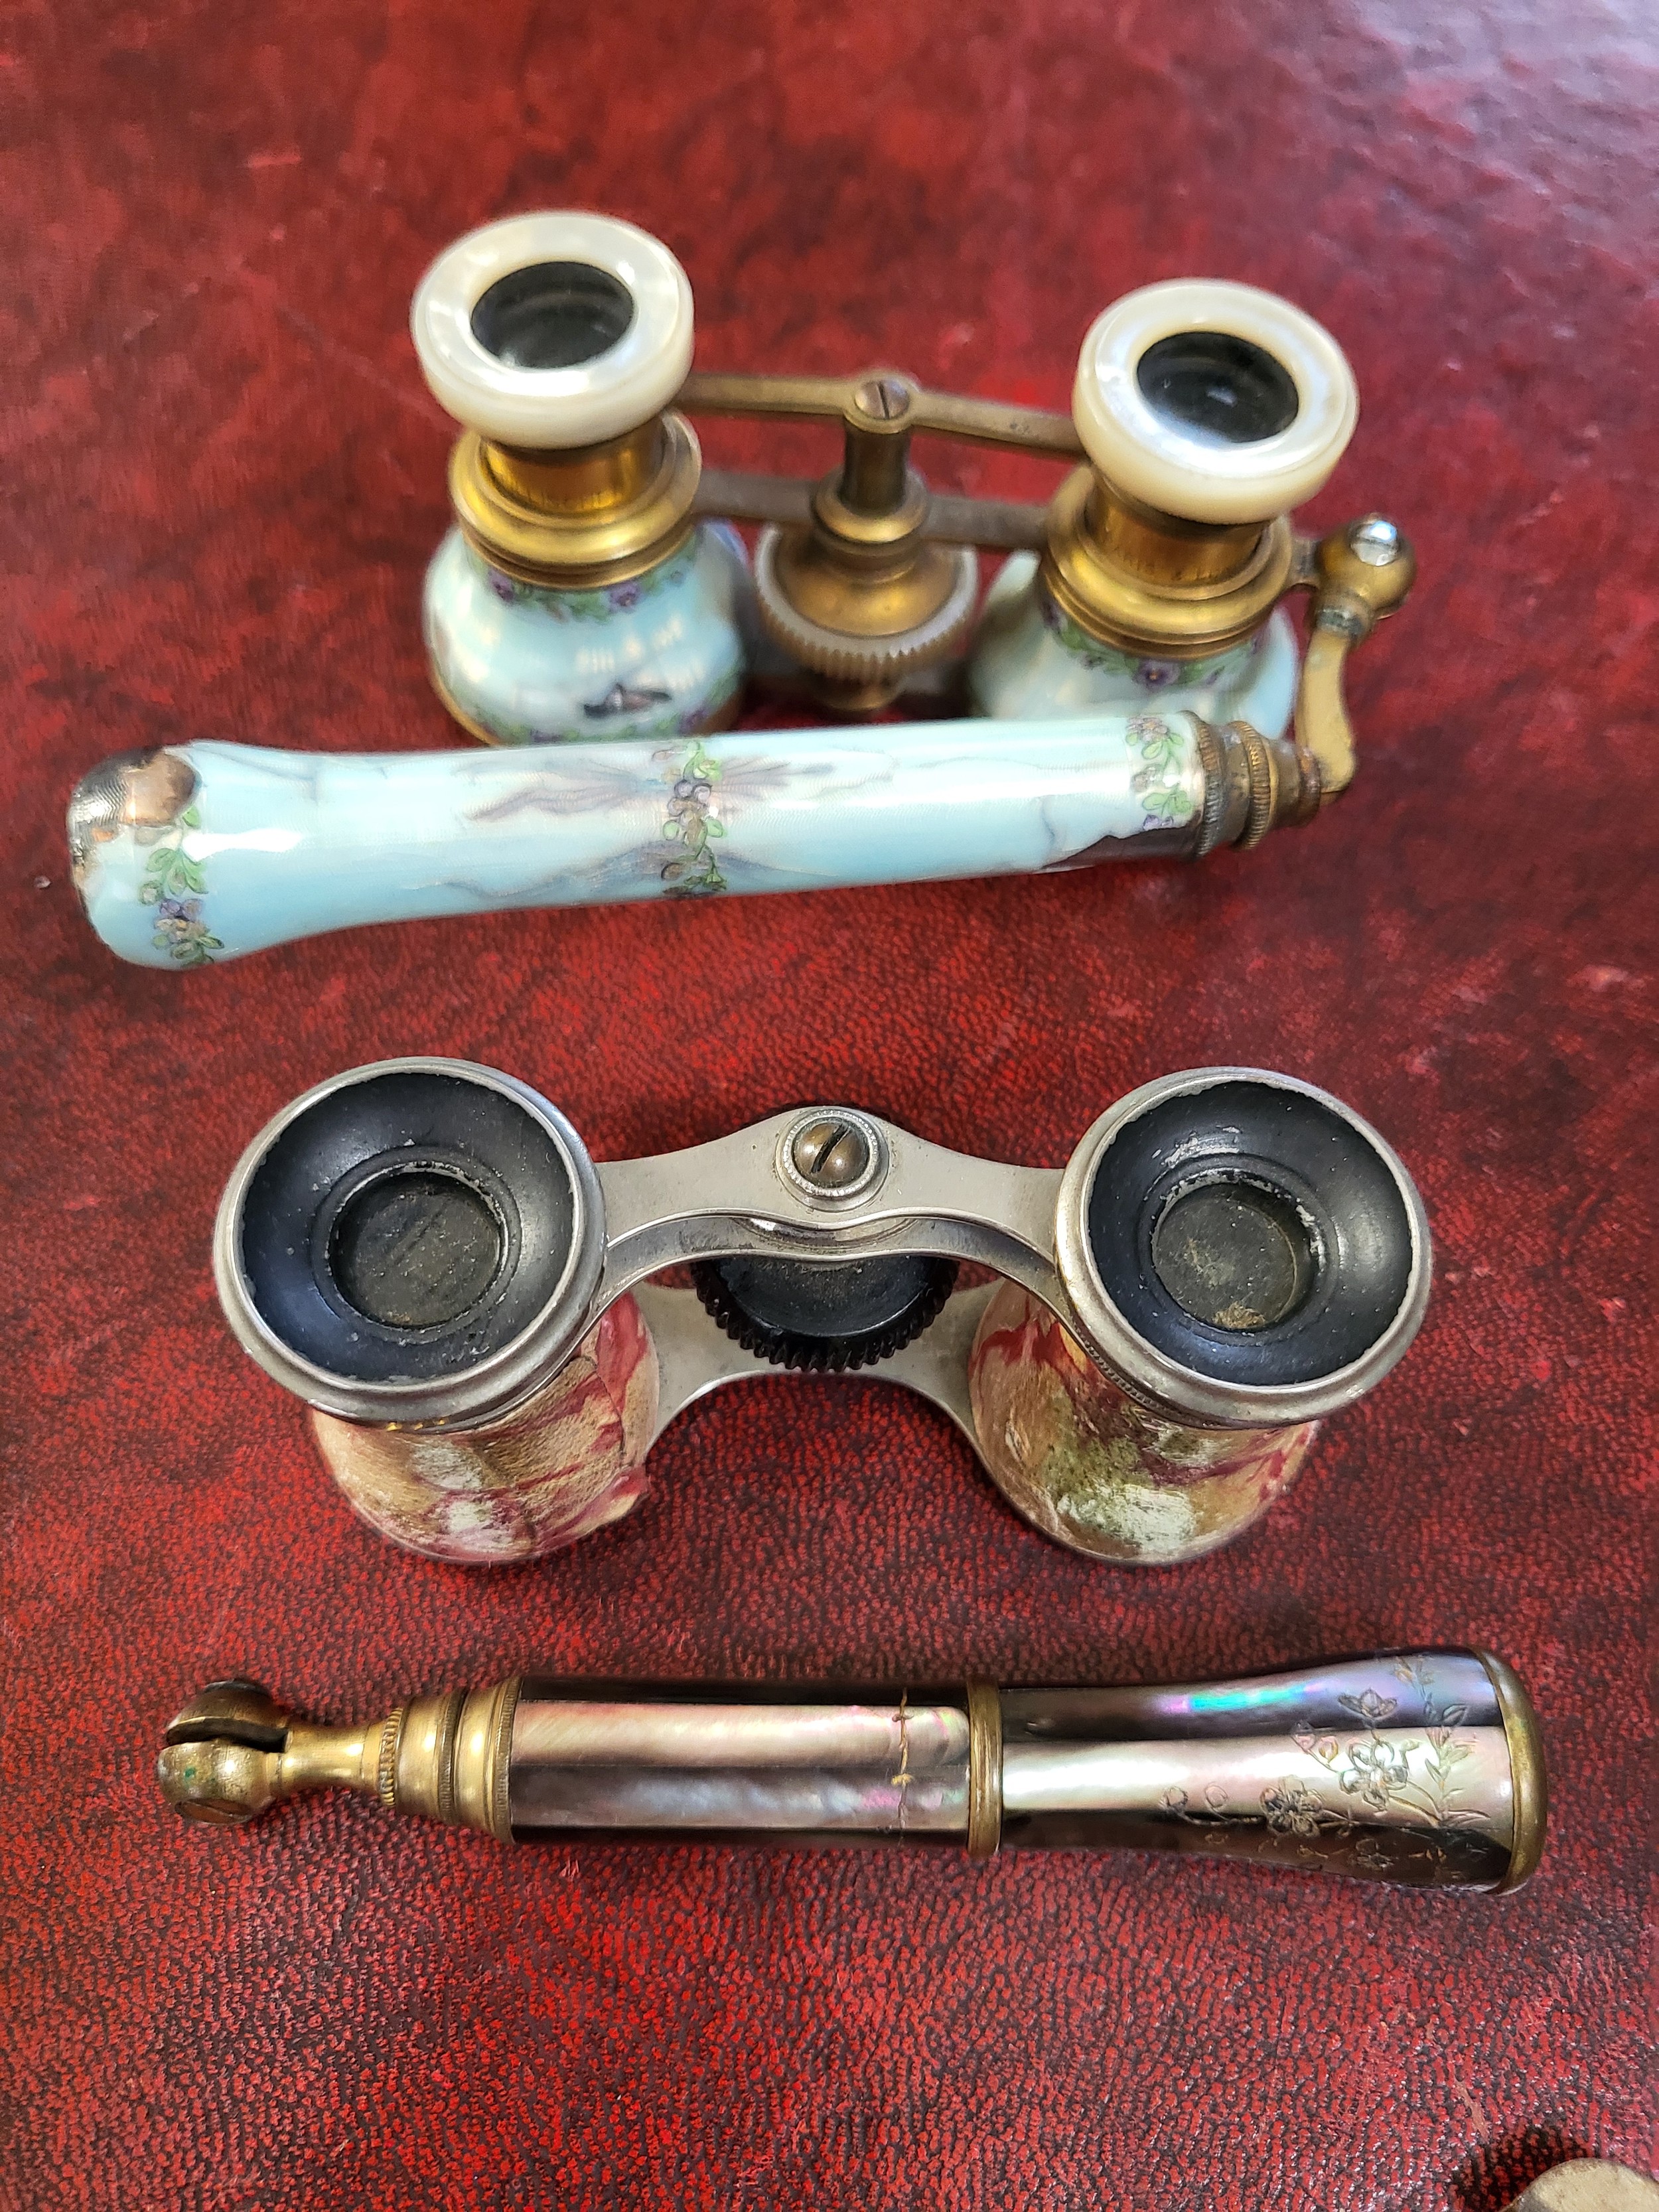 Opera glasses, irons, tins whistle - Image 6 of 8